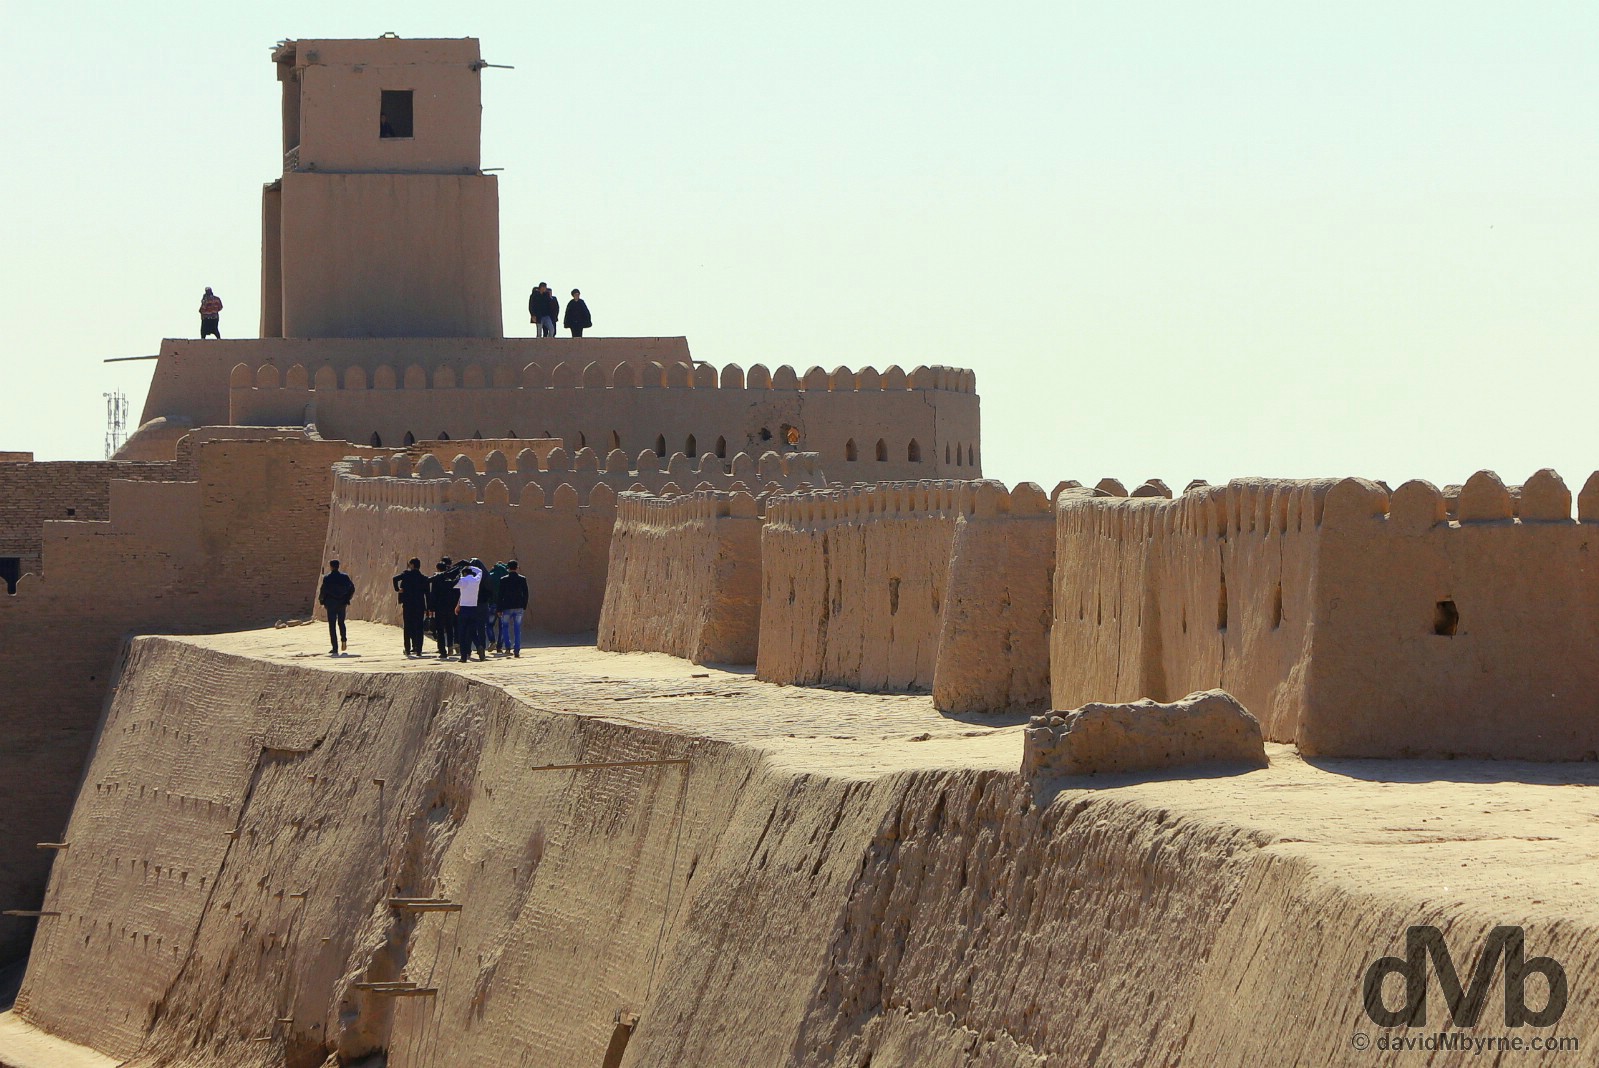 Walking atop the city wall towards the Kuhna Ark Watchtower in Khiva, Uzbekistan. March 14, 2015.